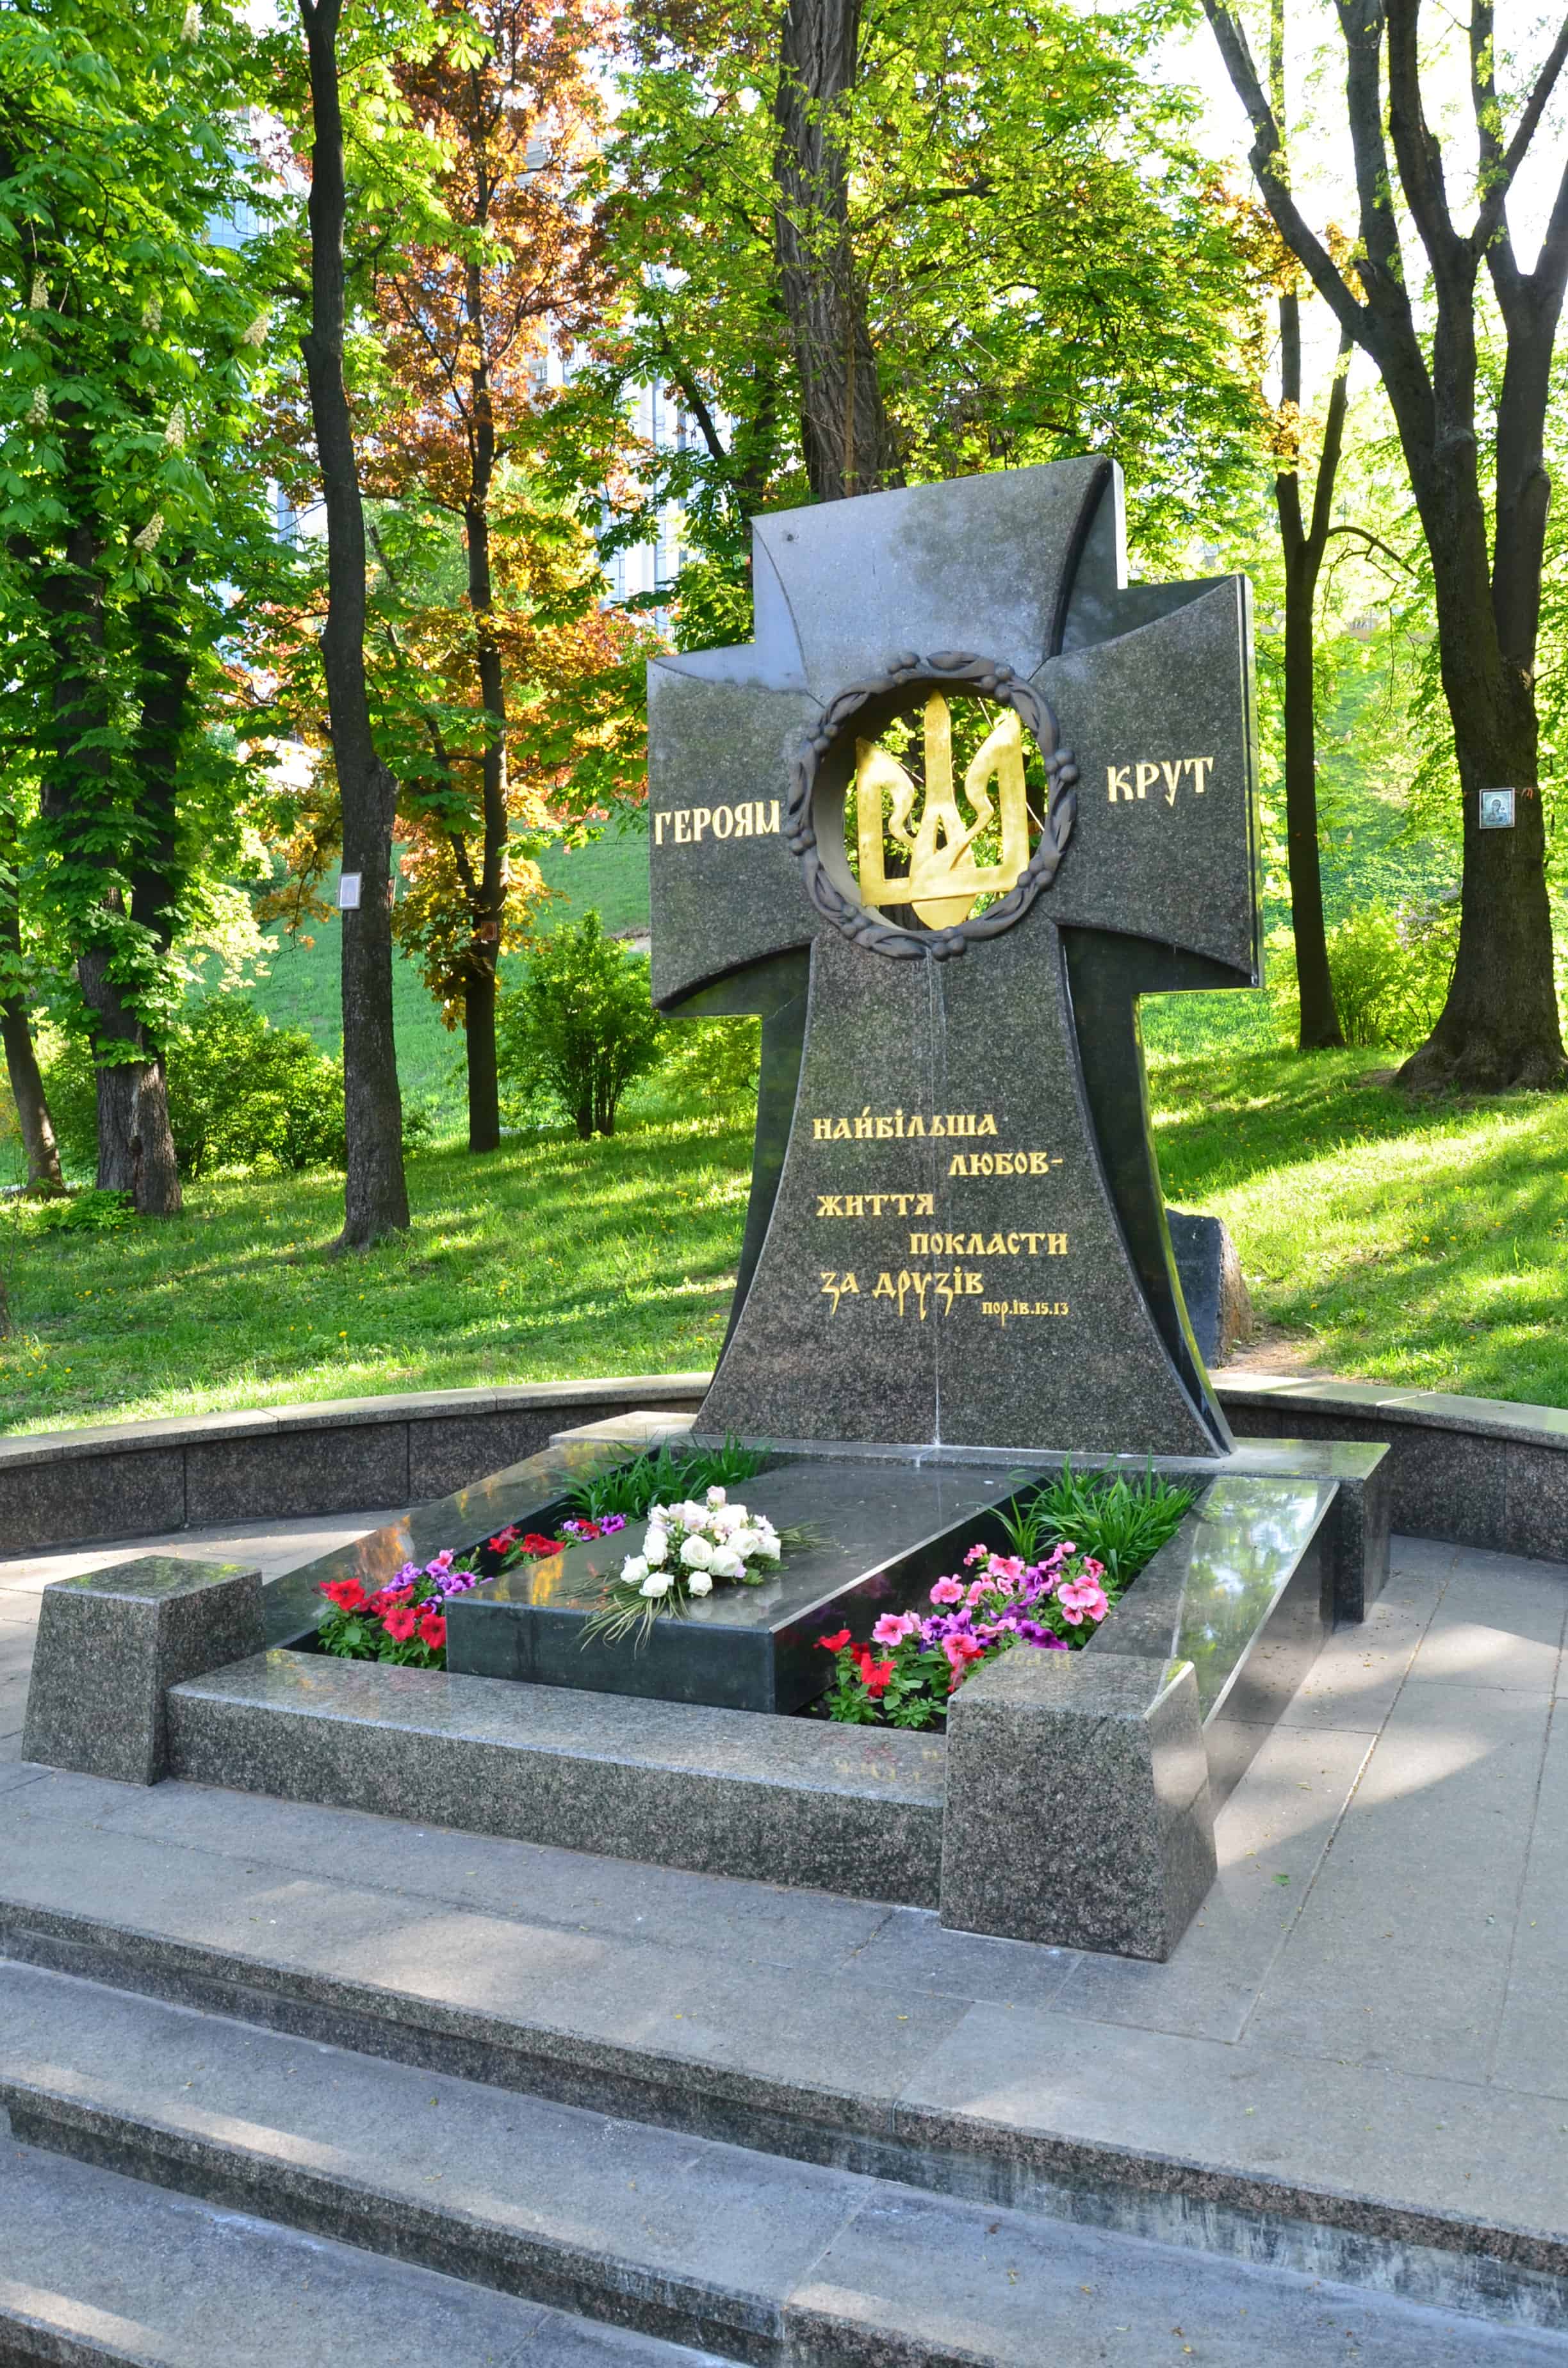 Monument to the Heroes of Krut at Askold's Grave Park in Kyiv, Ukraine